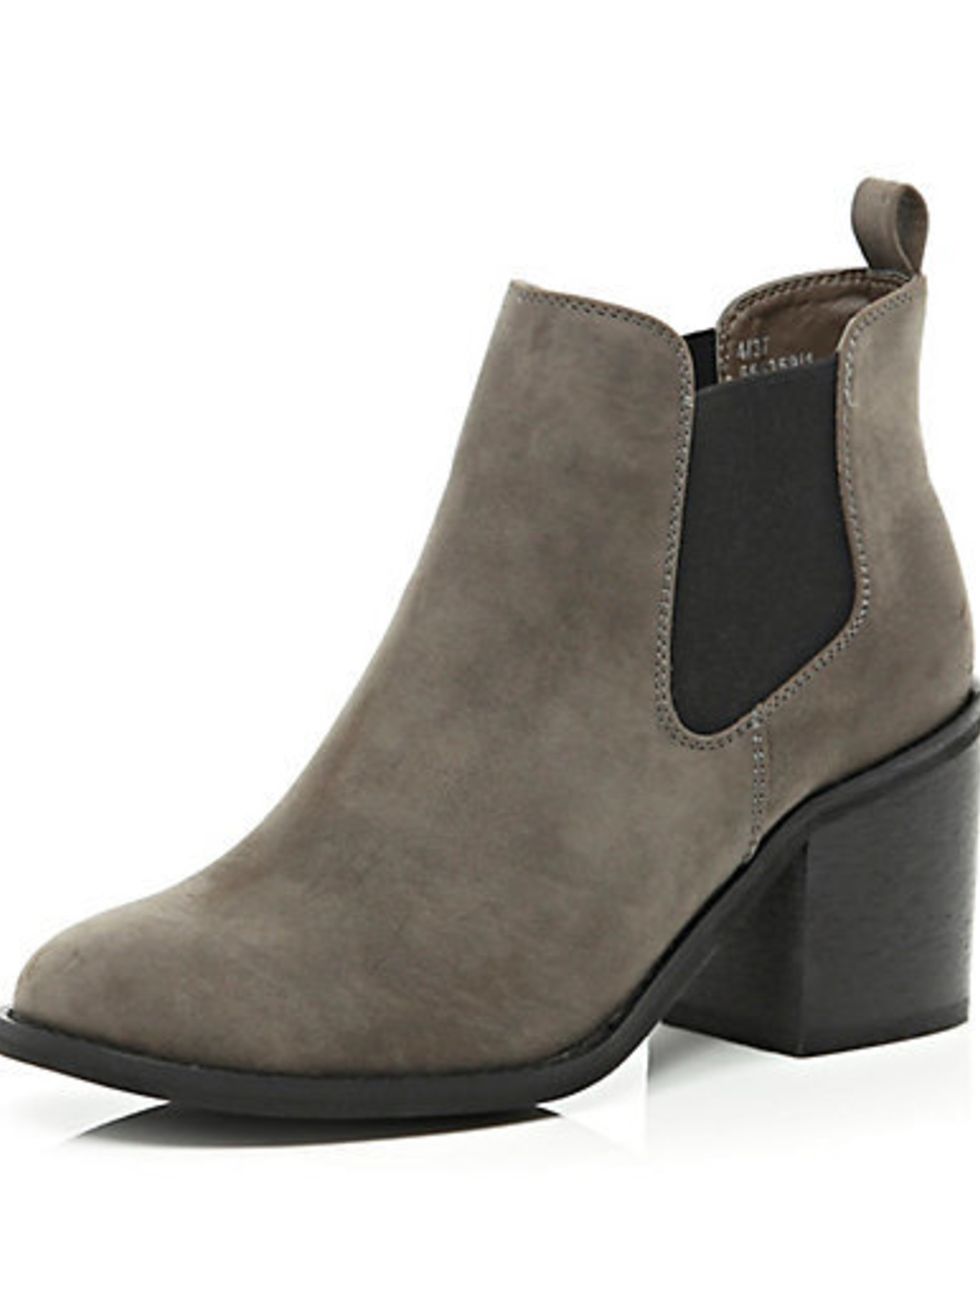 <p>Dark brown Chelsea boot, £38 at <a href="http://www.riverisland.com/women/shoes--boots/ankle-boots/Dark-brown-block-heel-Chelsea-boots-655359">River Island</a>.</p>